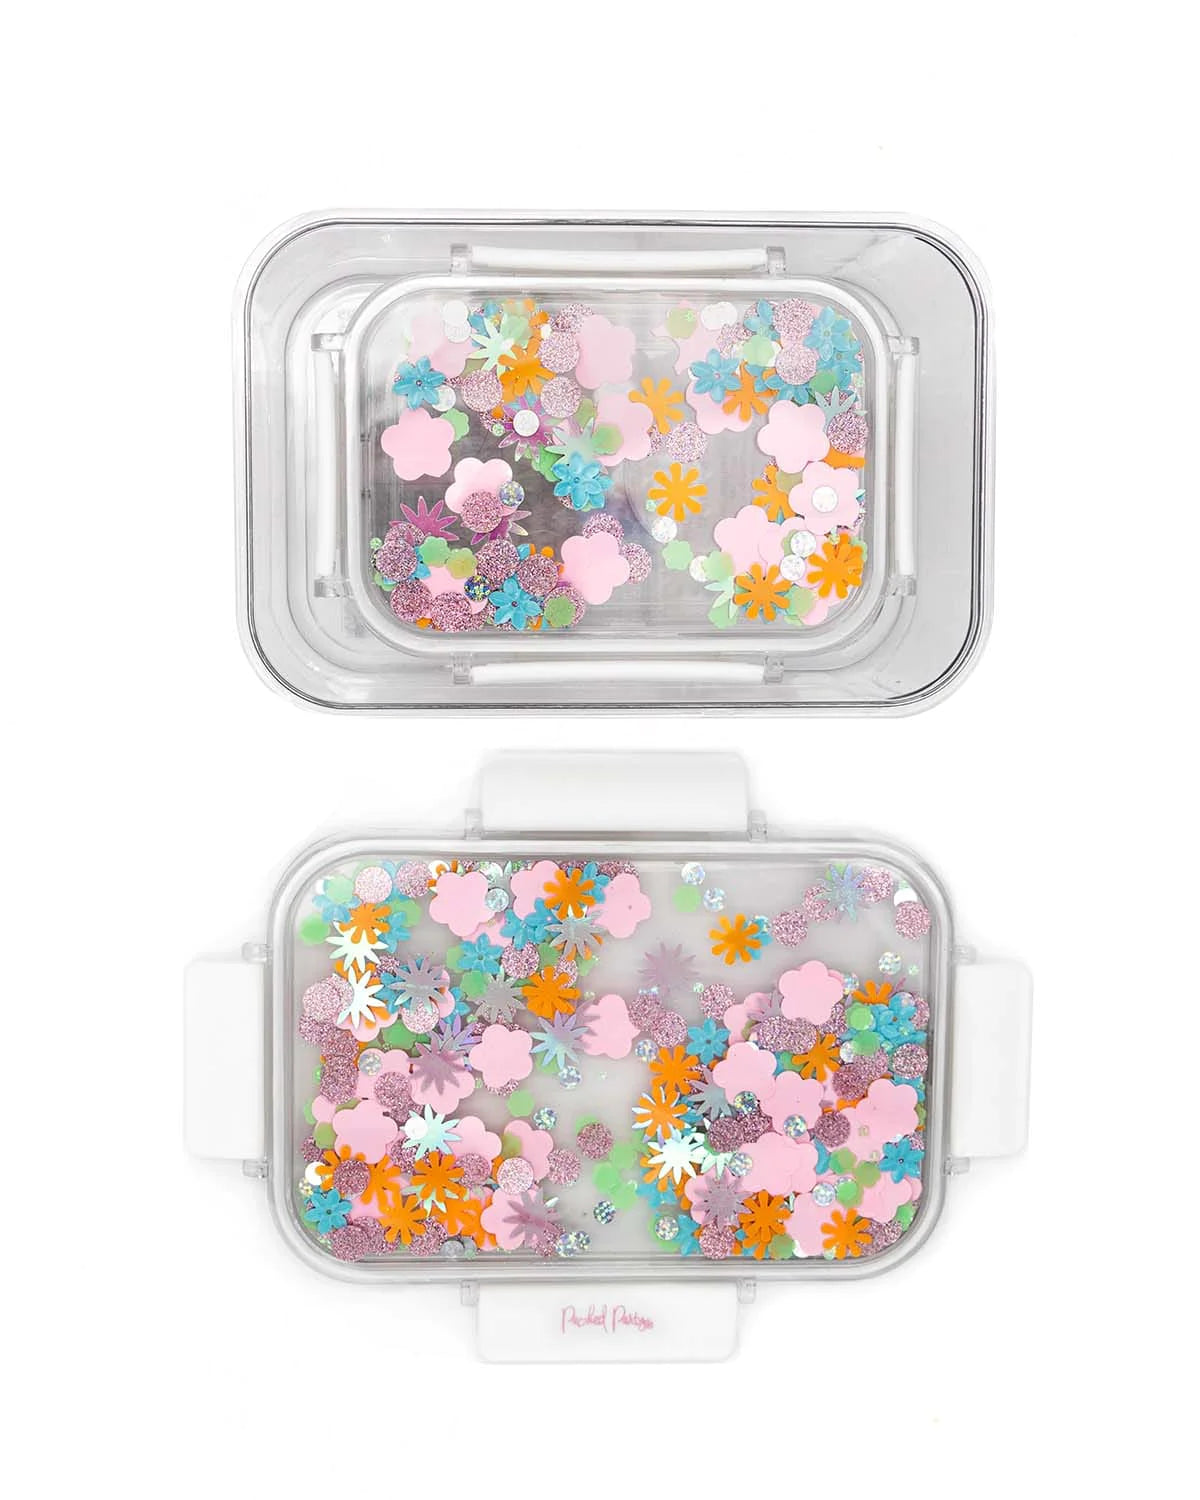 Confetti Lunch Storage Containers (set of two)